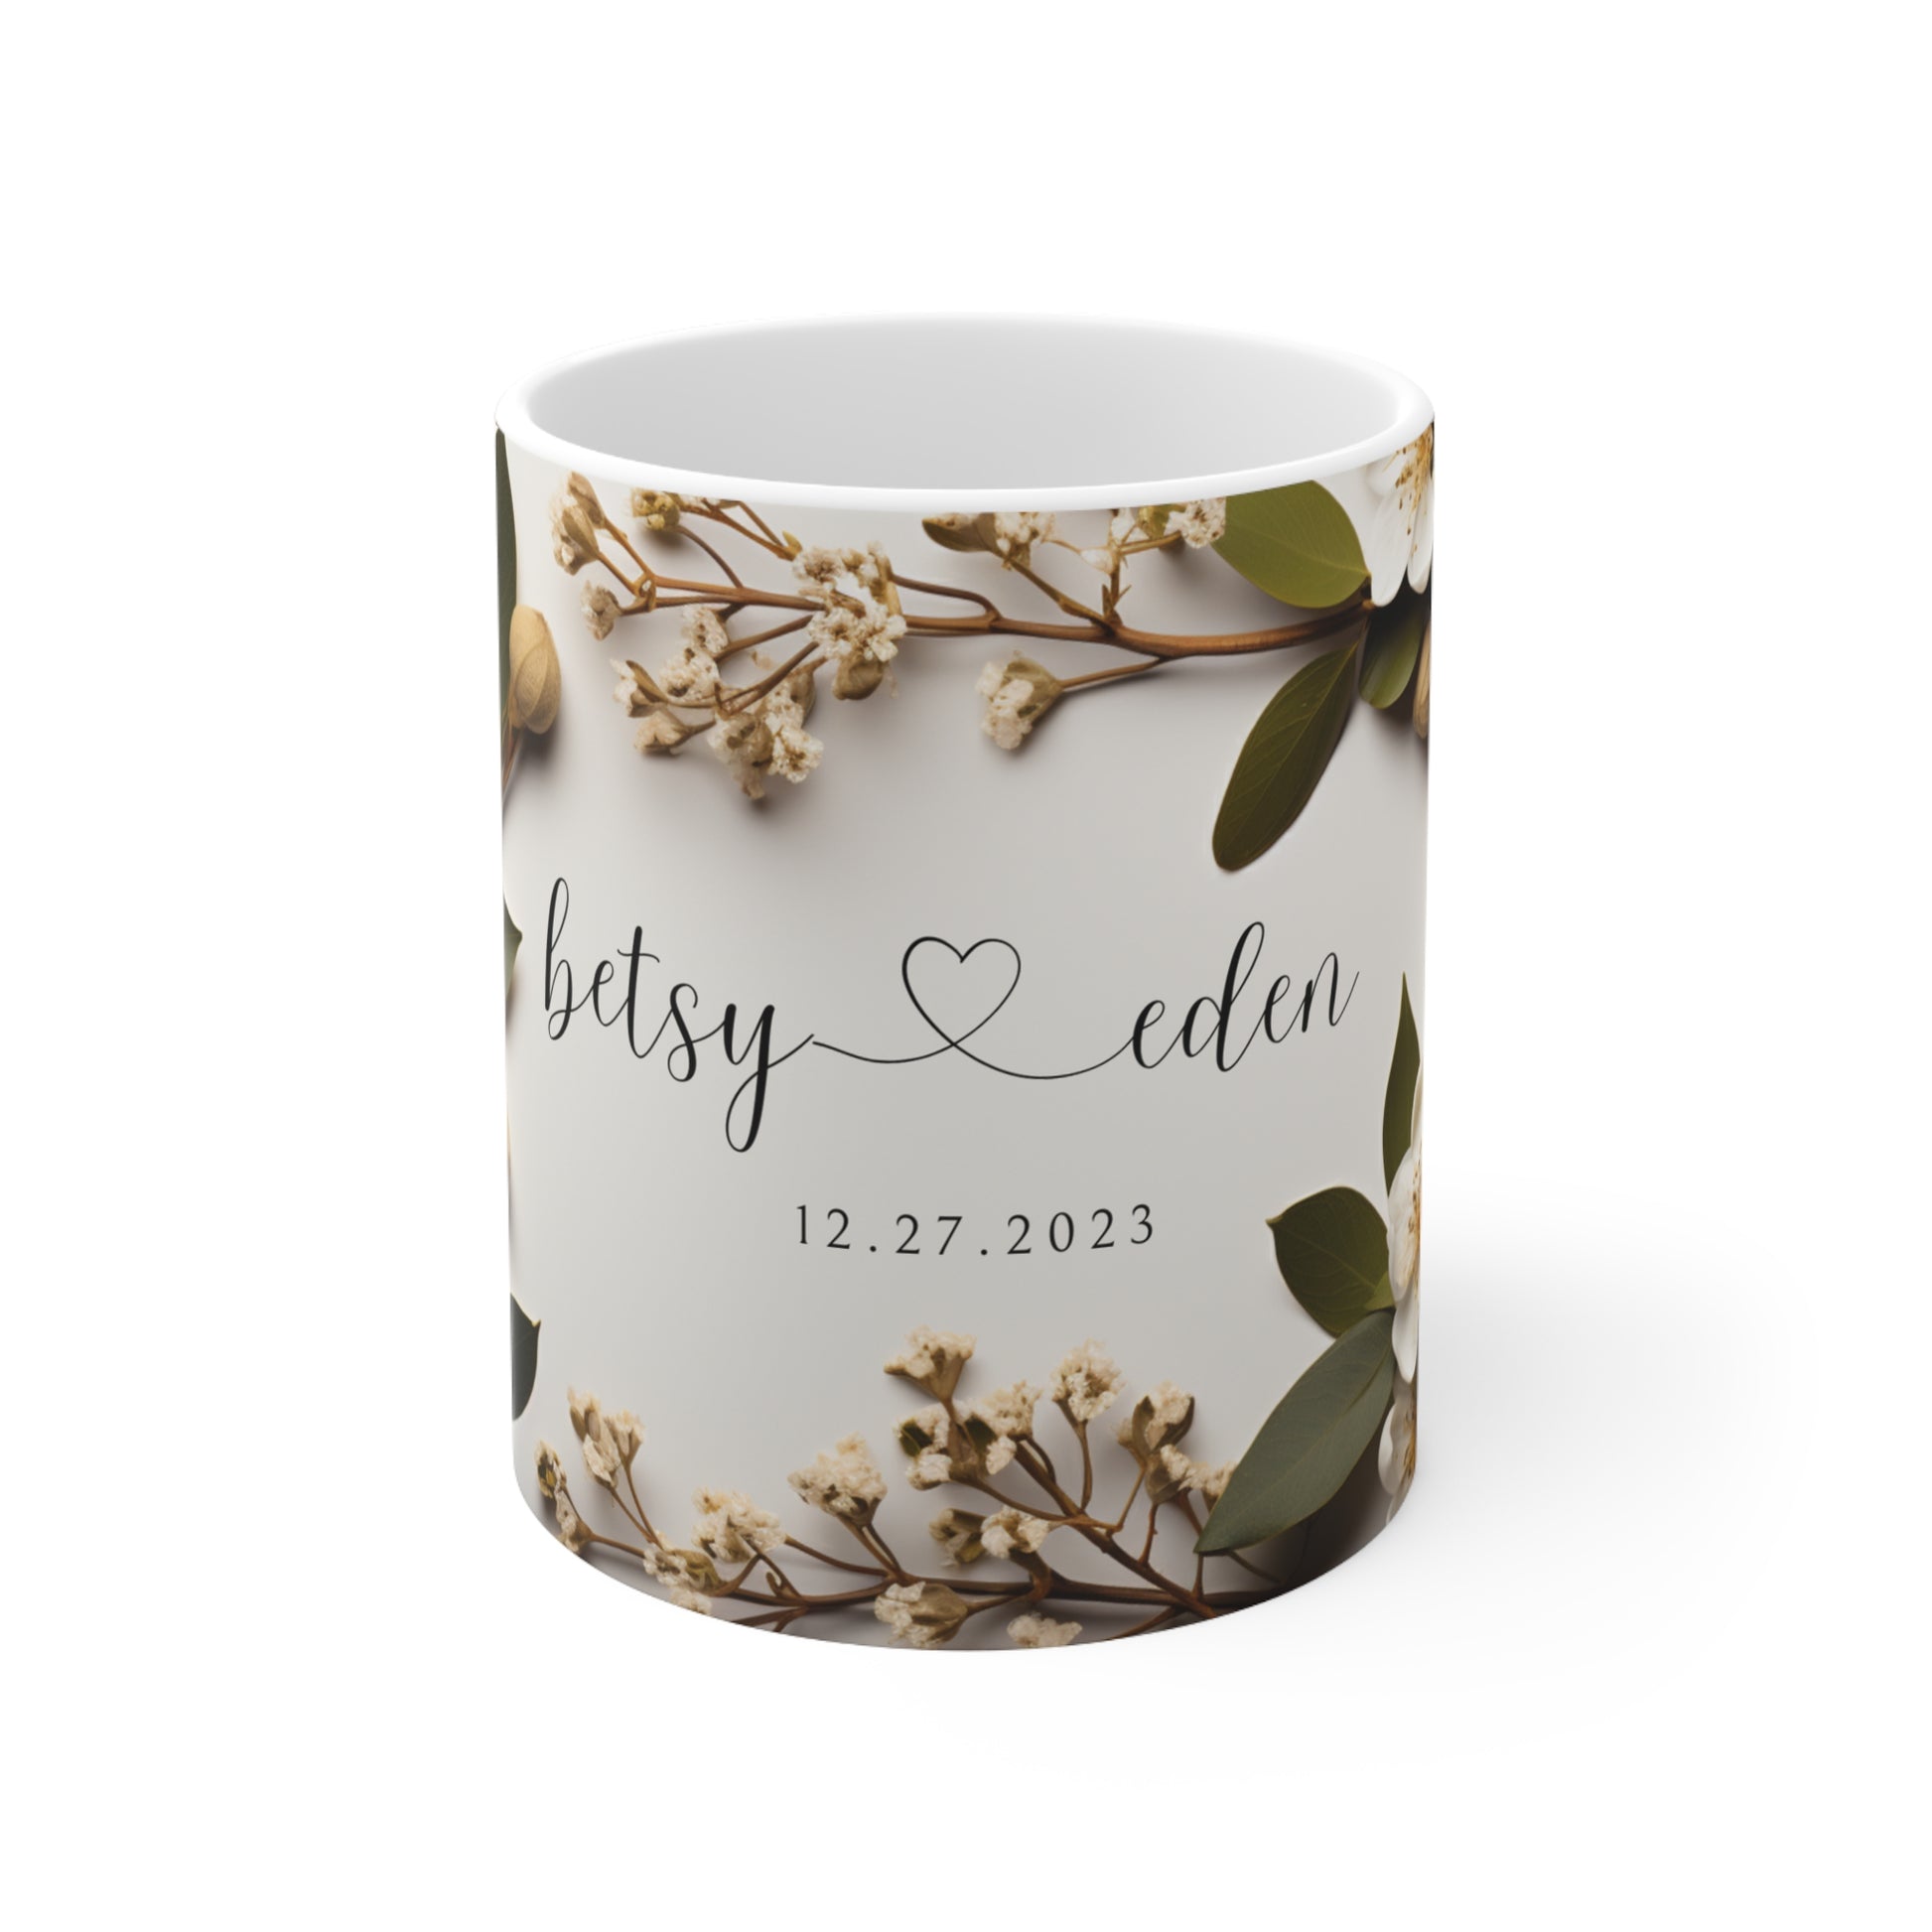 Wedding Coffee Mugs: Custom Keepsakes for Your Special Day (All